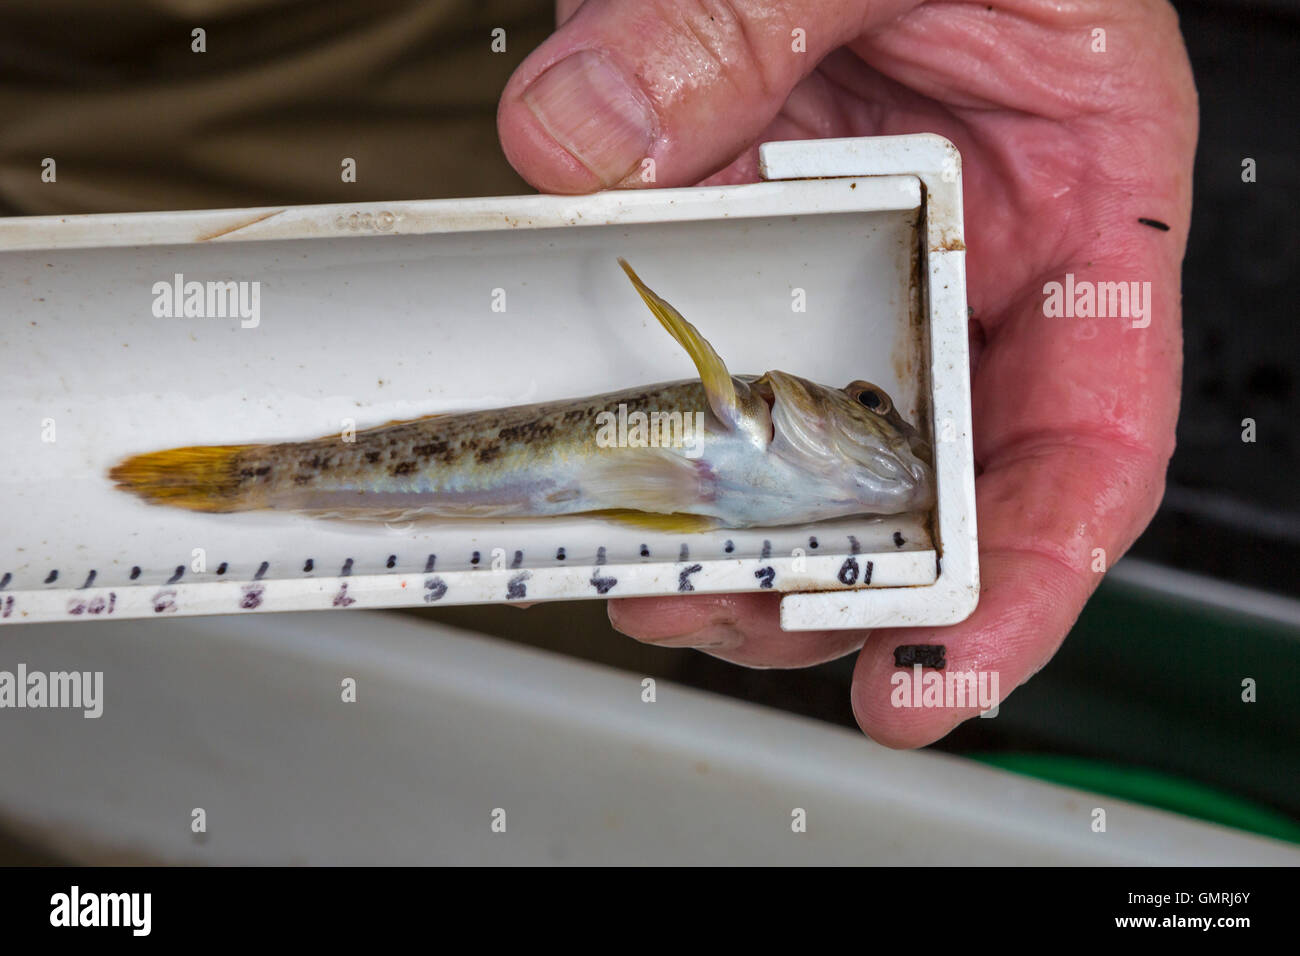 Wayne, Michigan - An invasive round goby (Neogobius melanostomus) found during a fish survey of the Lower Rouge River. Stock Photo